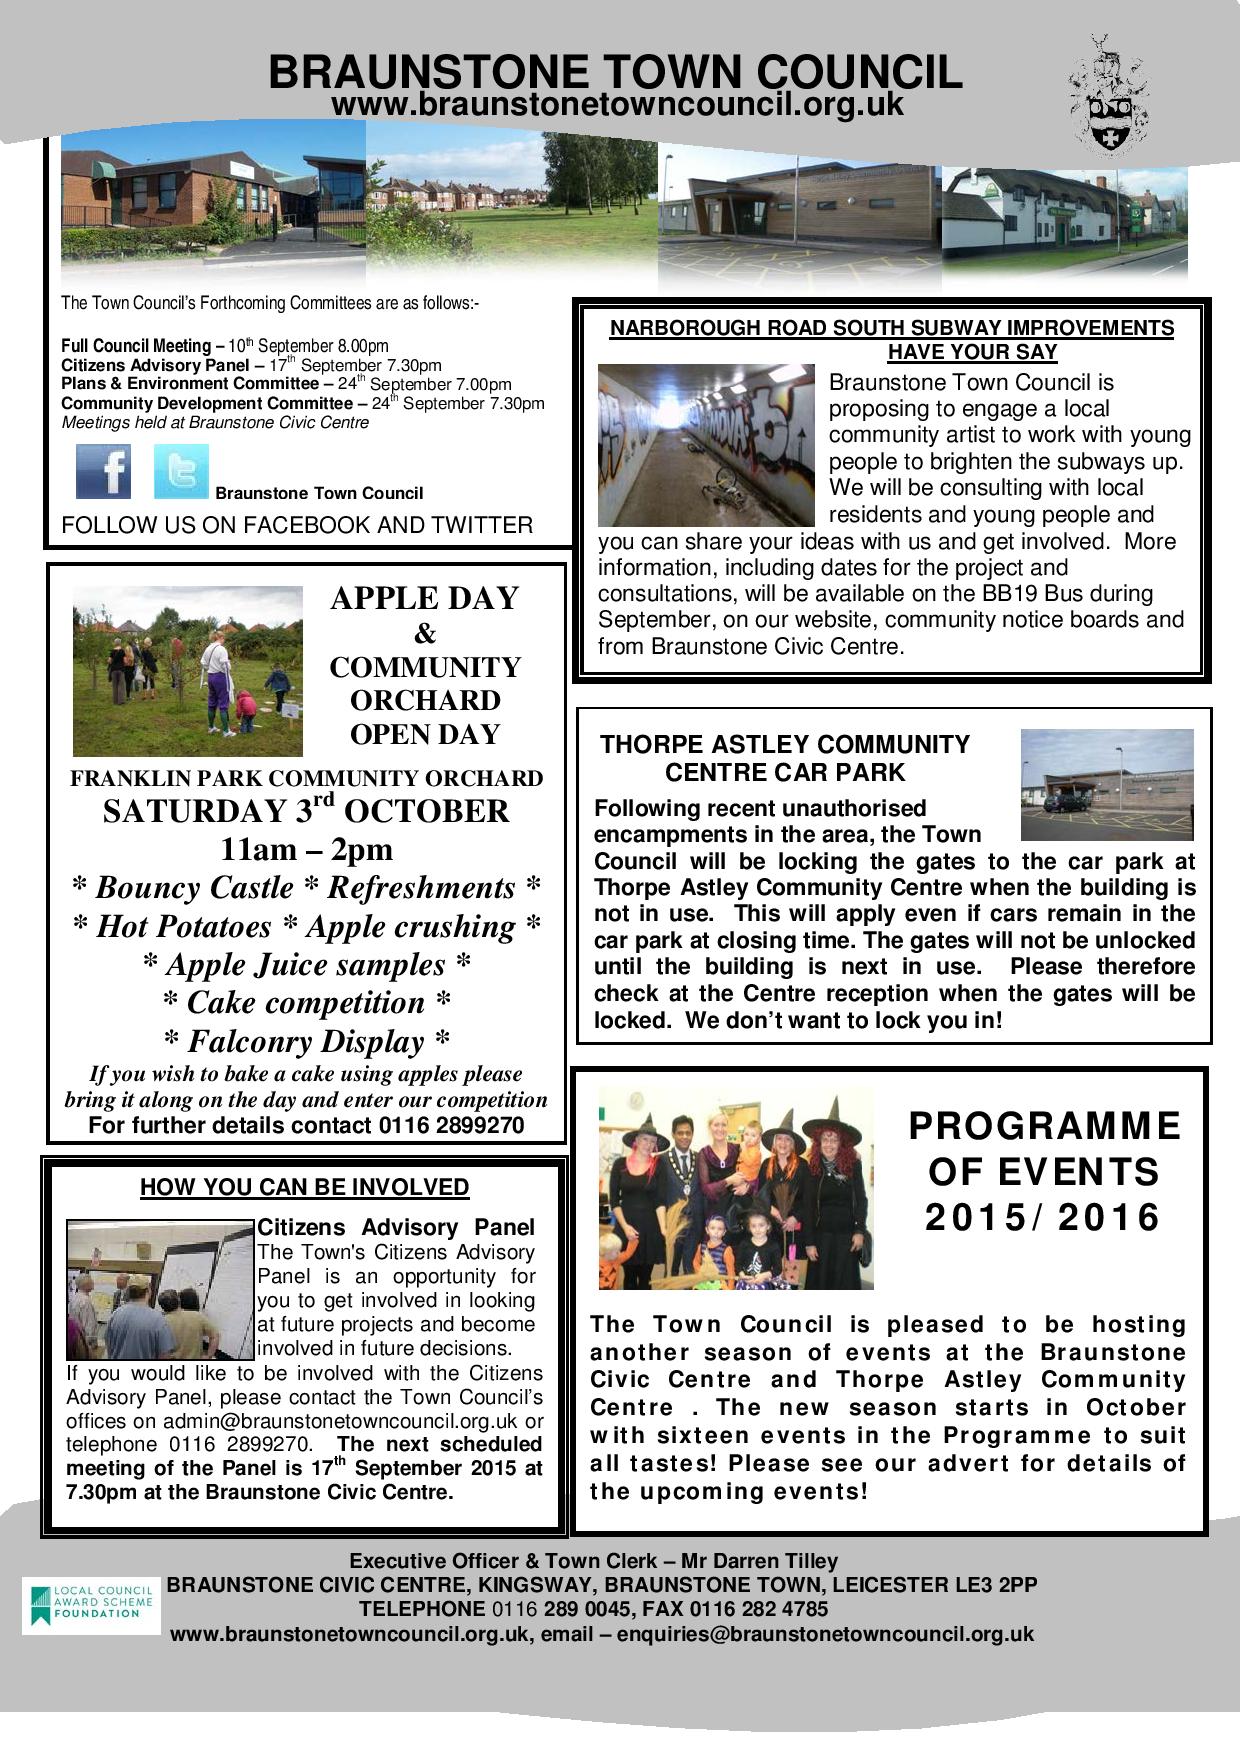 The Town Council article from the September 2015 issue of the Braunstone Life